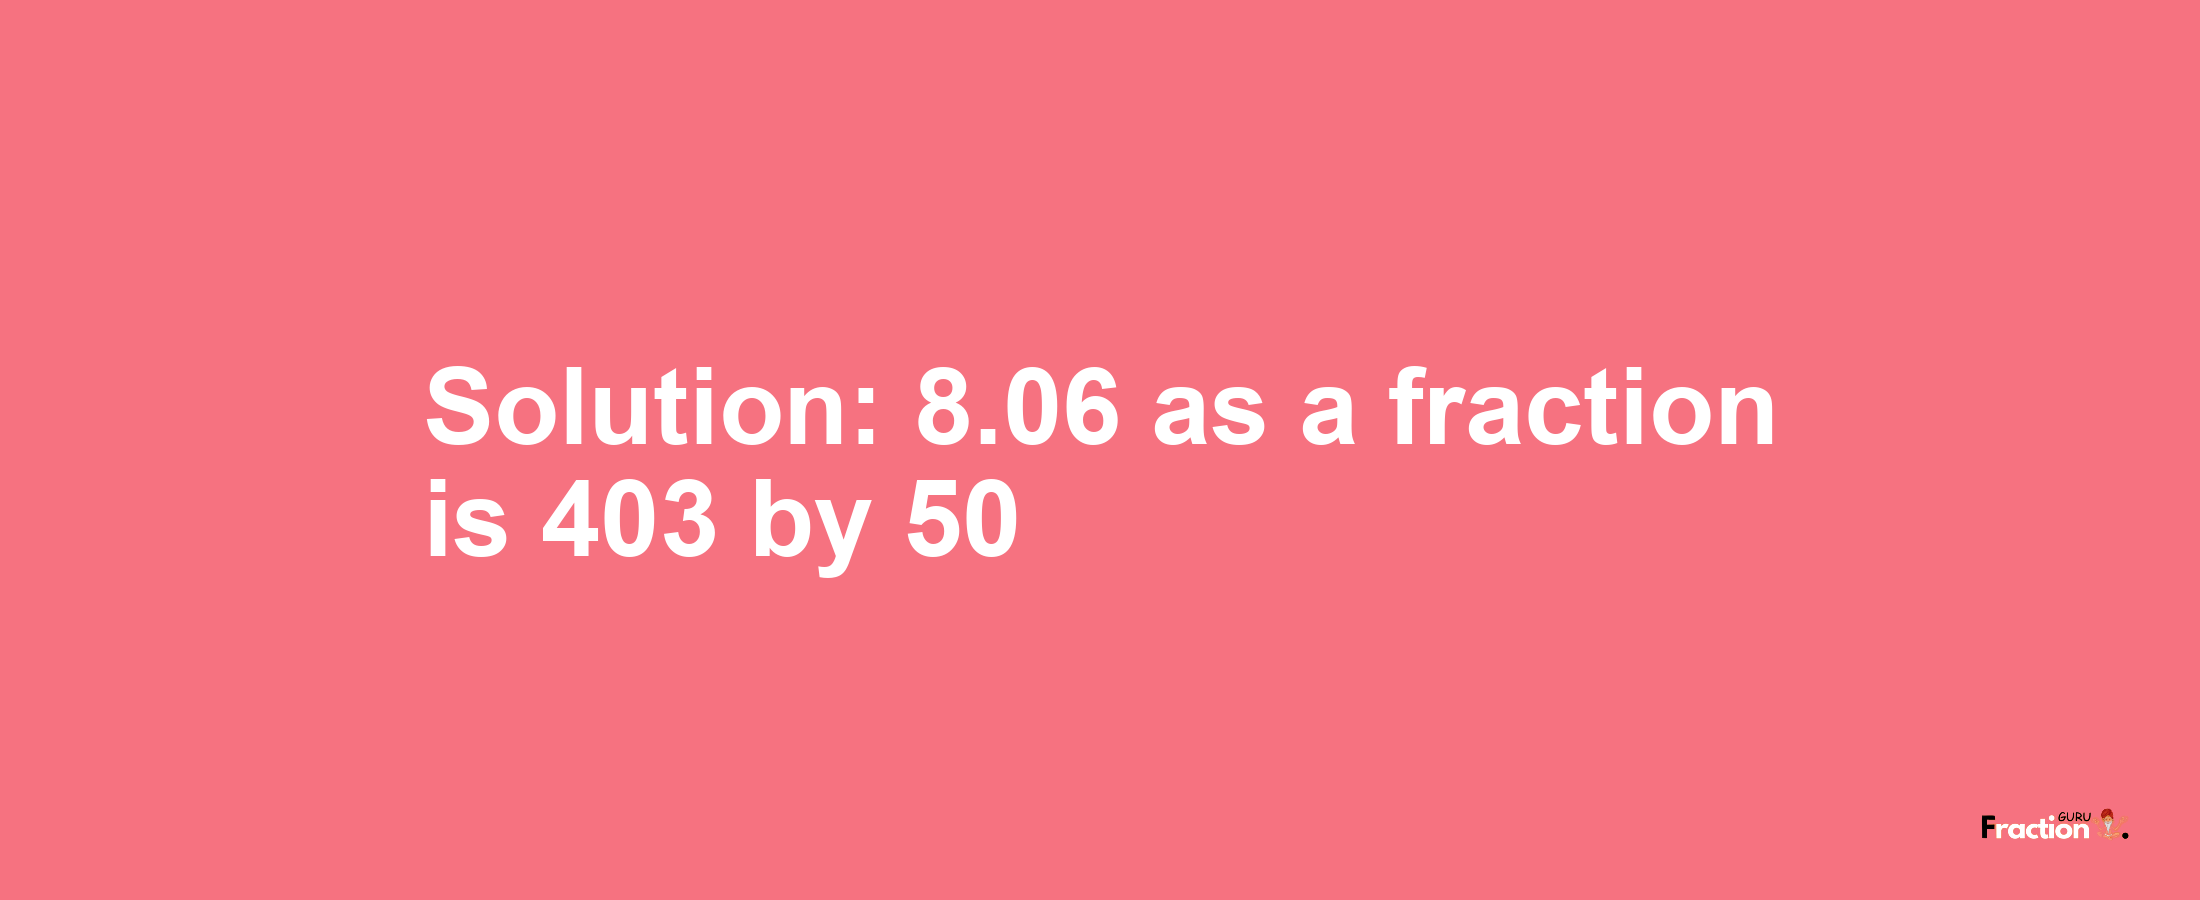 Solution:8.06 as a fraction is 403/50